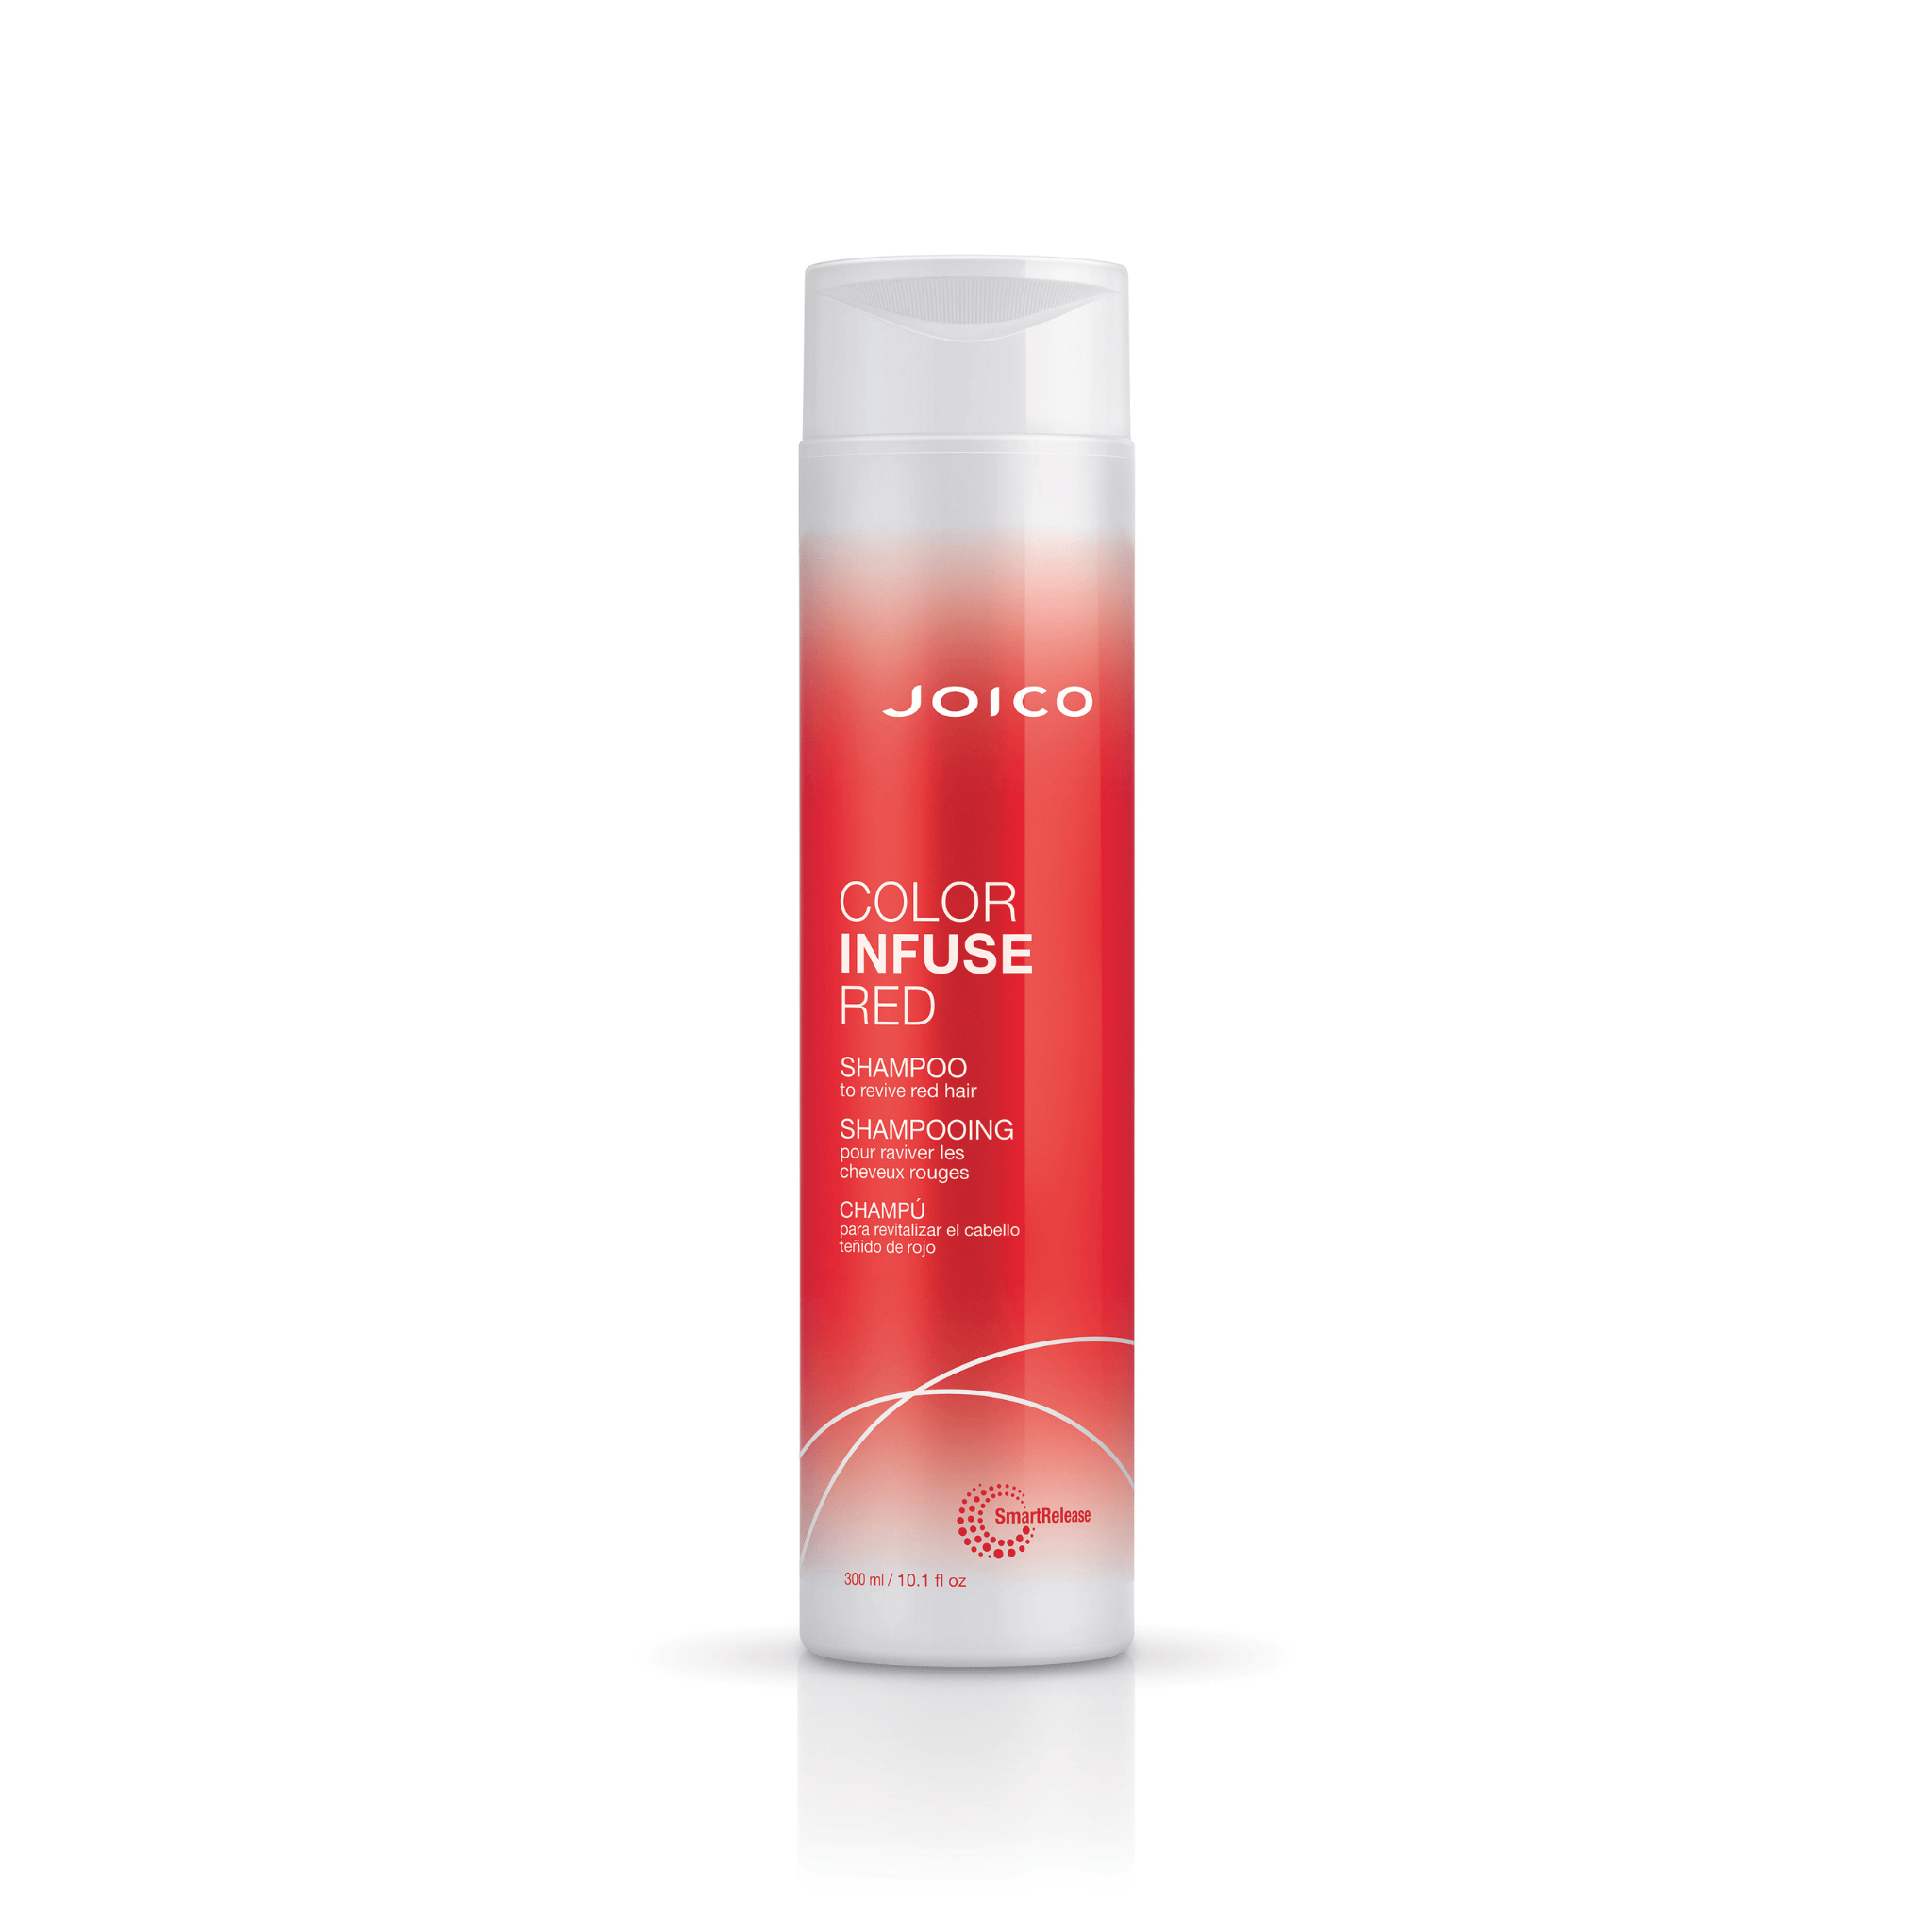 Joico. Shampoing Rouge Color Infuse Red - 300ml - Concept C. Shop